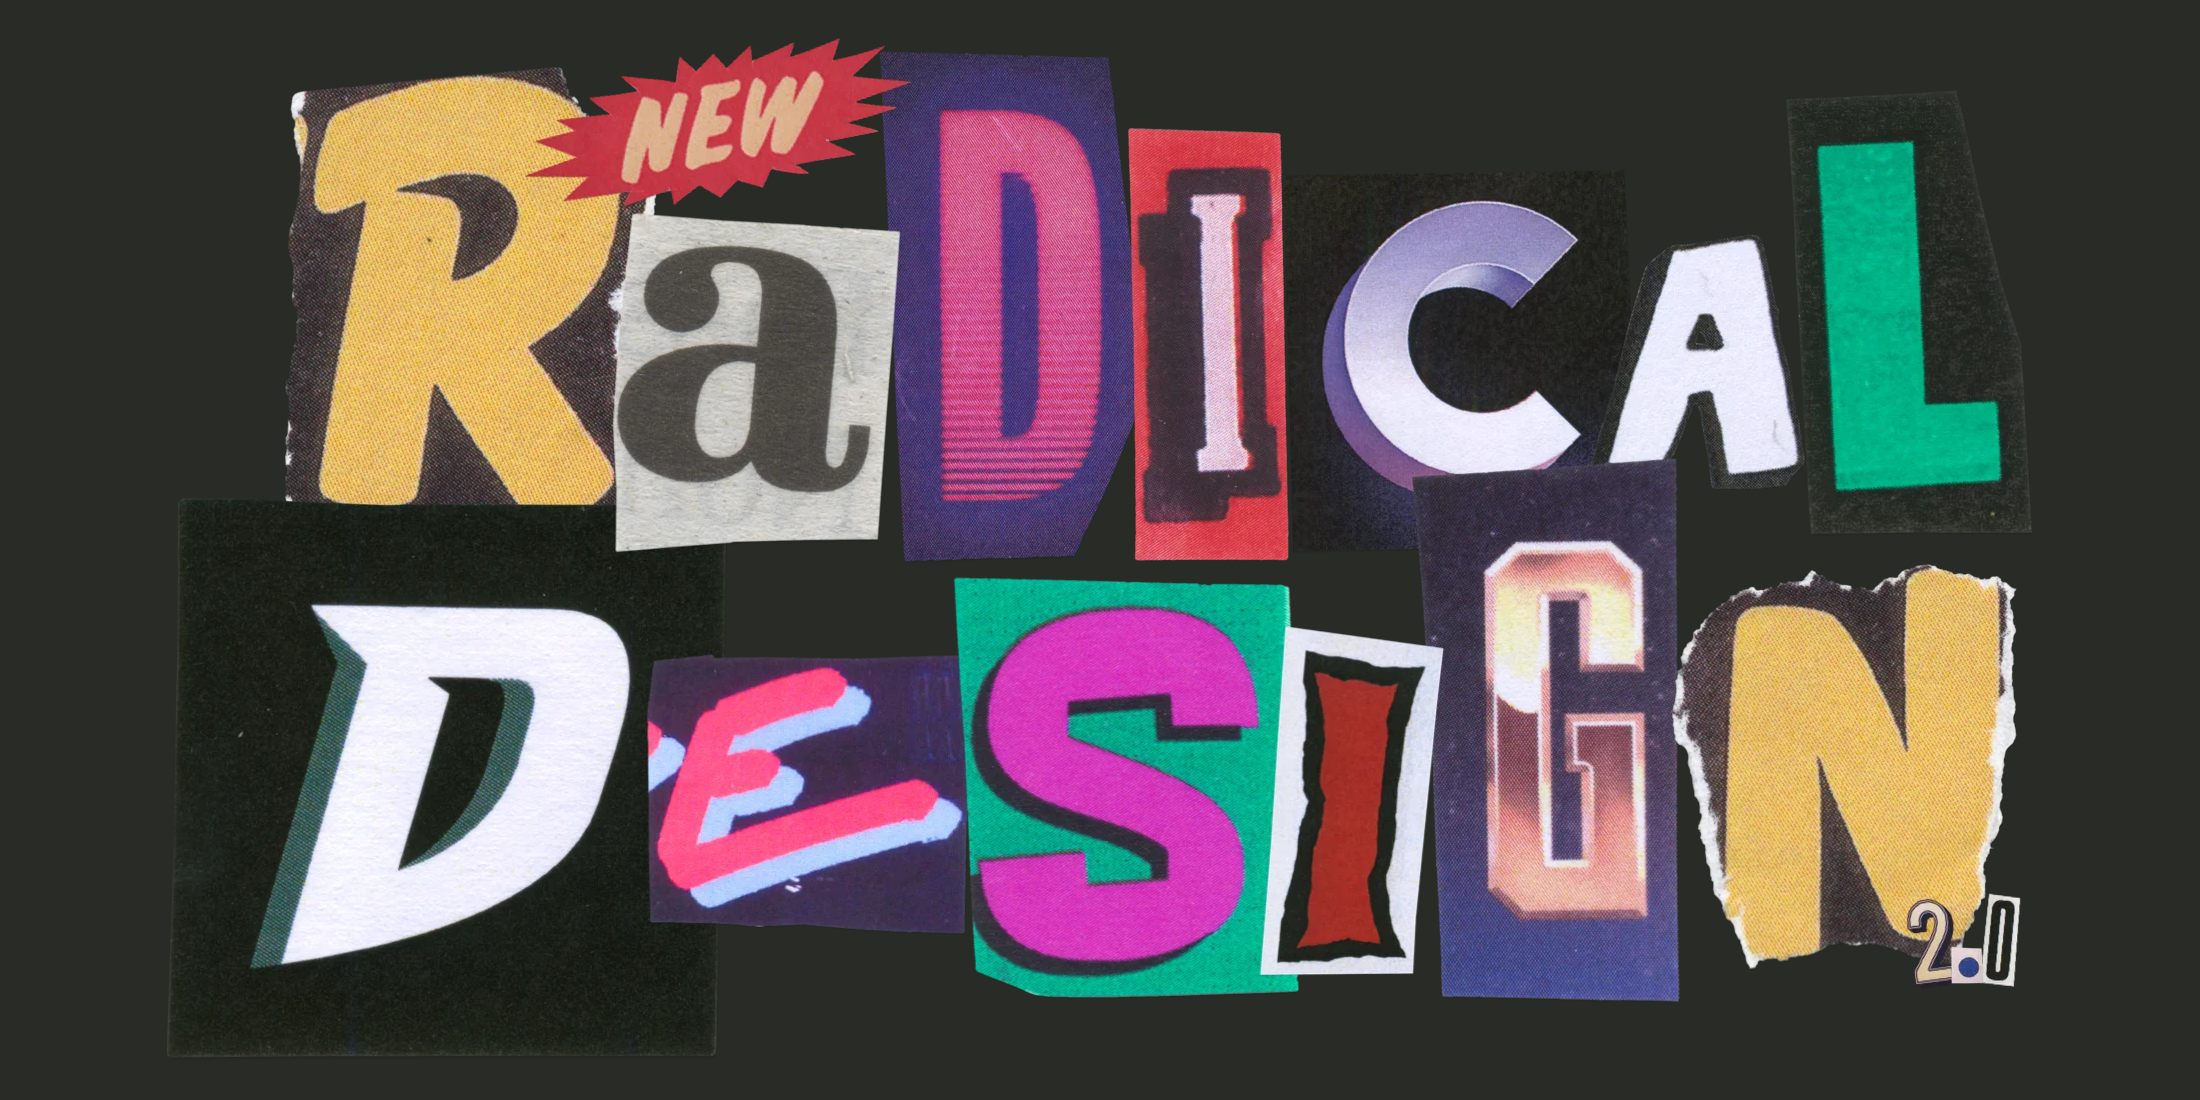 Radical Design - A new course by Jack McDade image